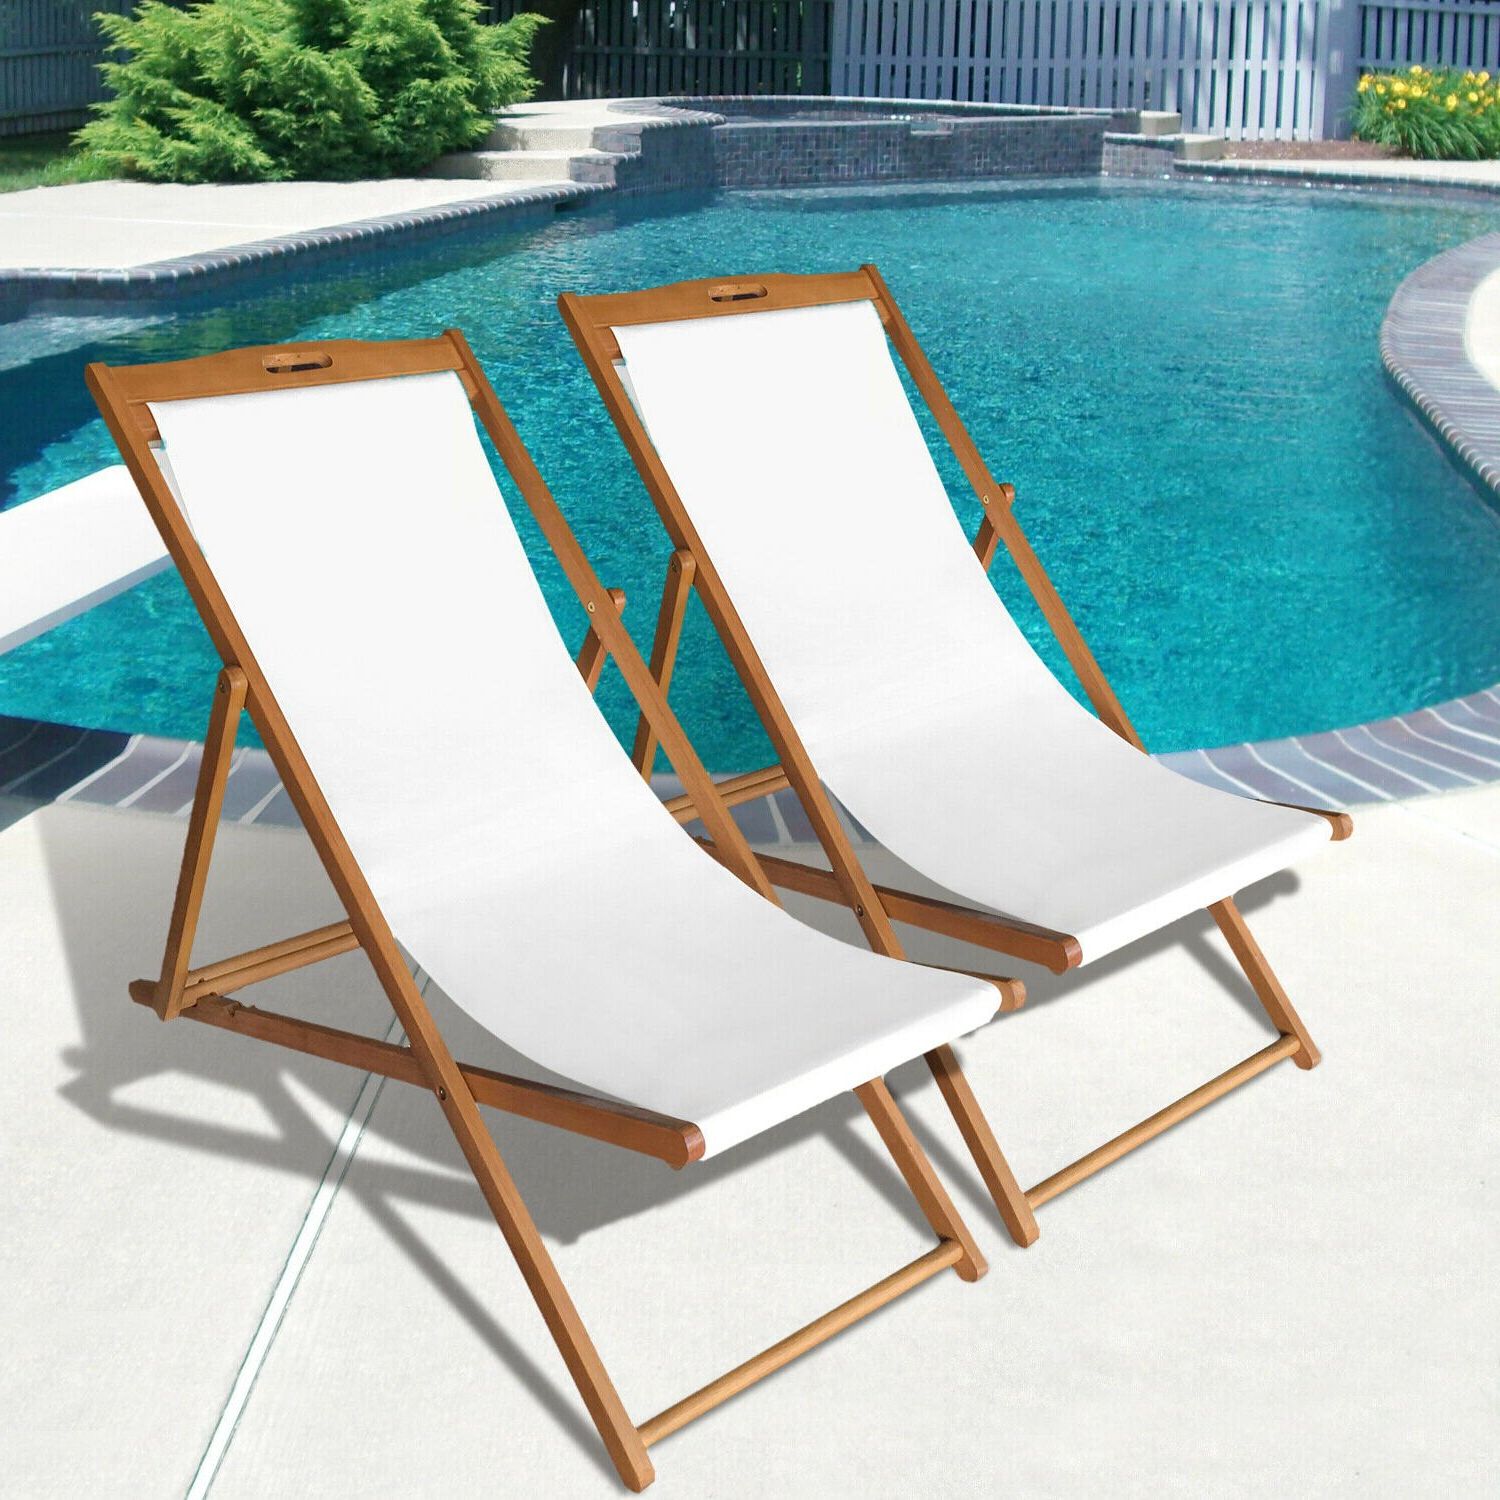 Most Popular Natural Wood Outdoor Lounger Chairs Pertaining To Factory Direct: Beach Sling Chair Set Patio Lounge Chair Outdoor (View 12 of 15)